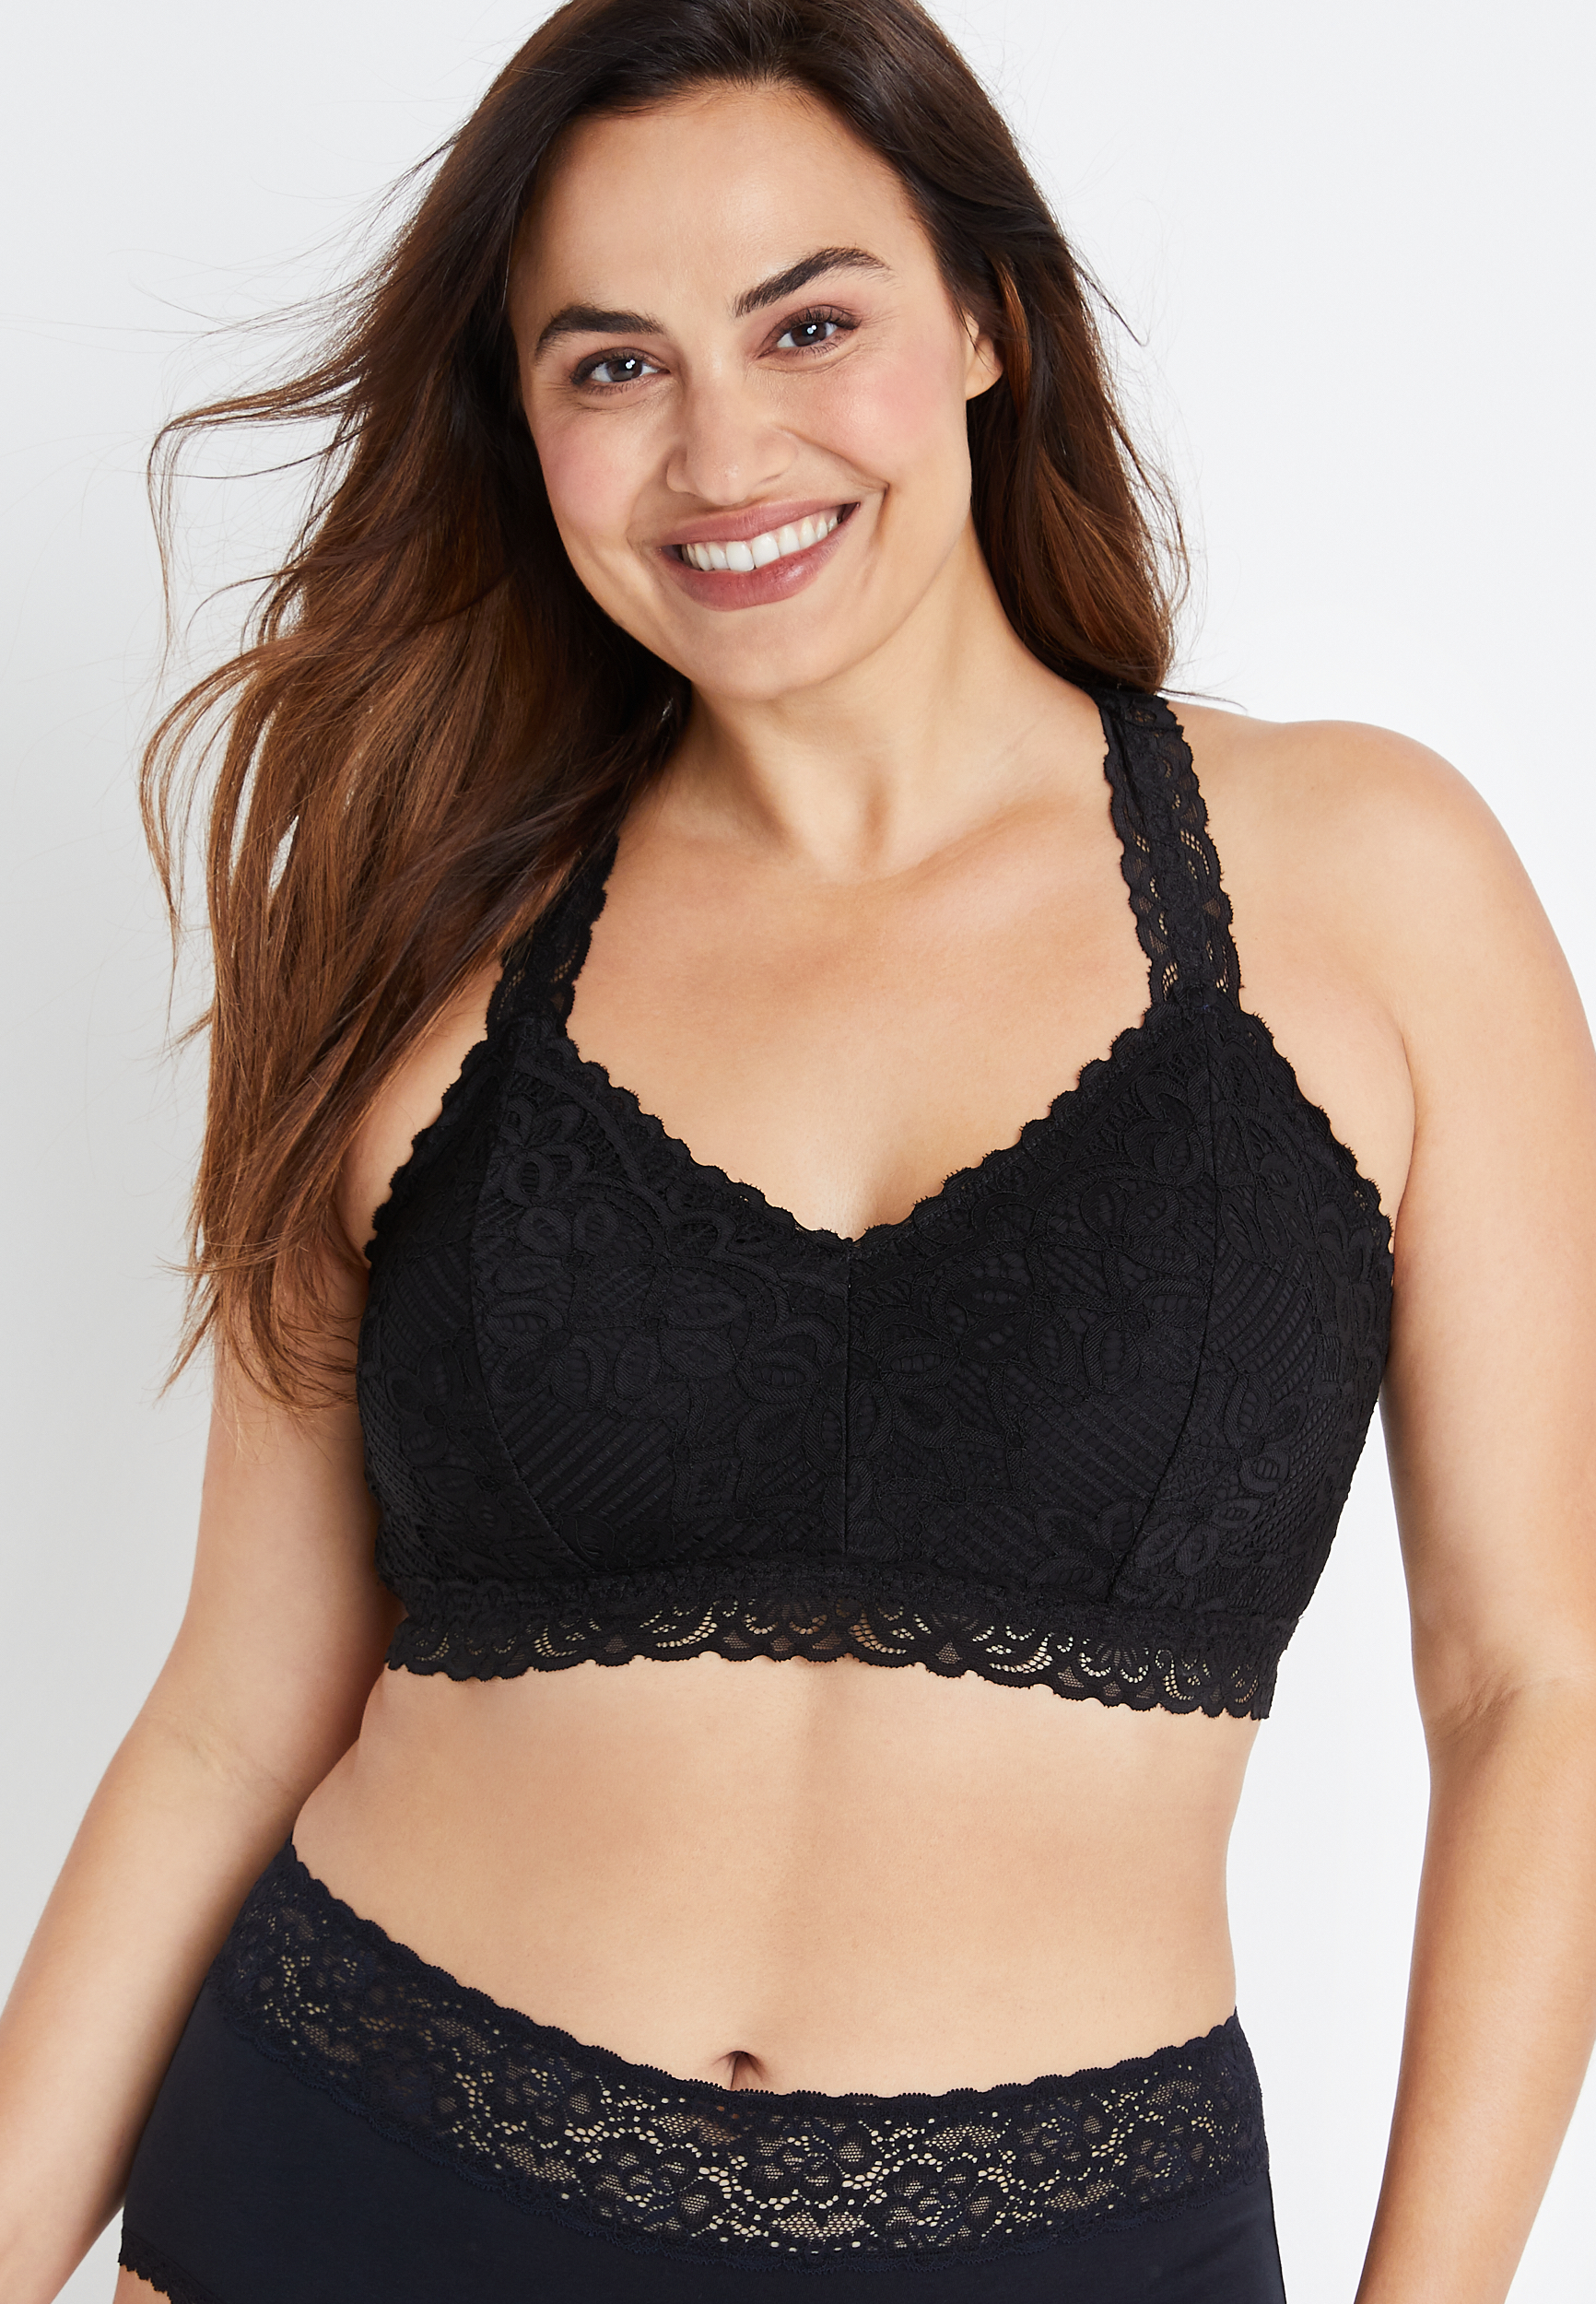 Invisibliss Lace Back Bralette